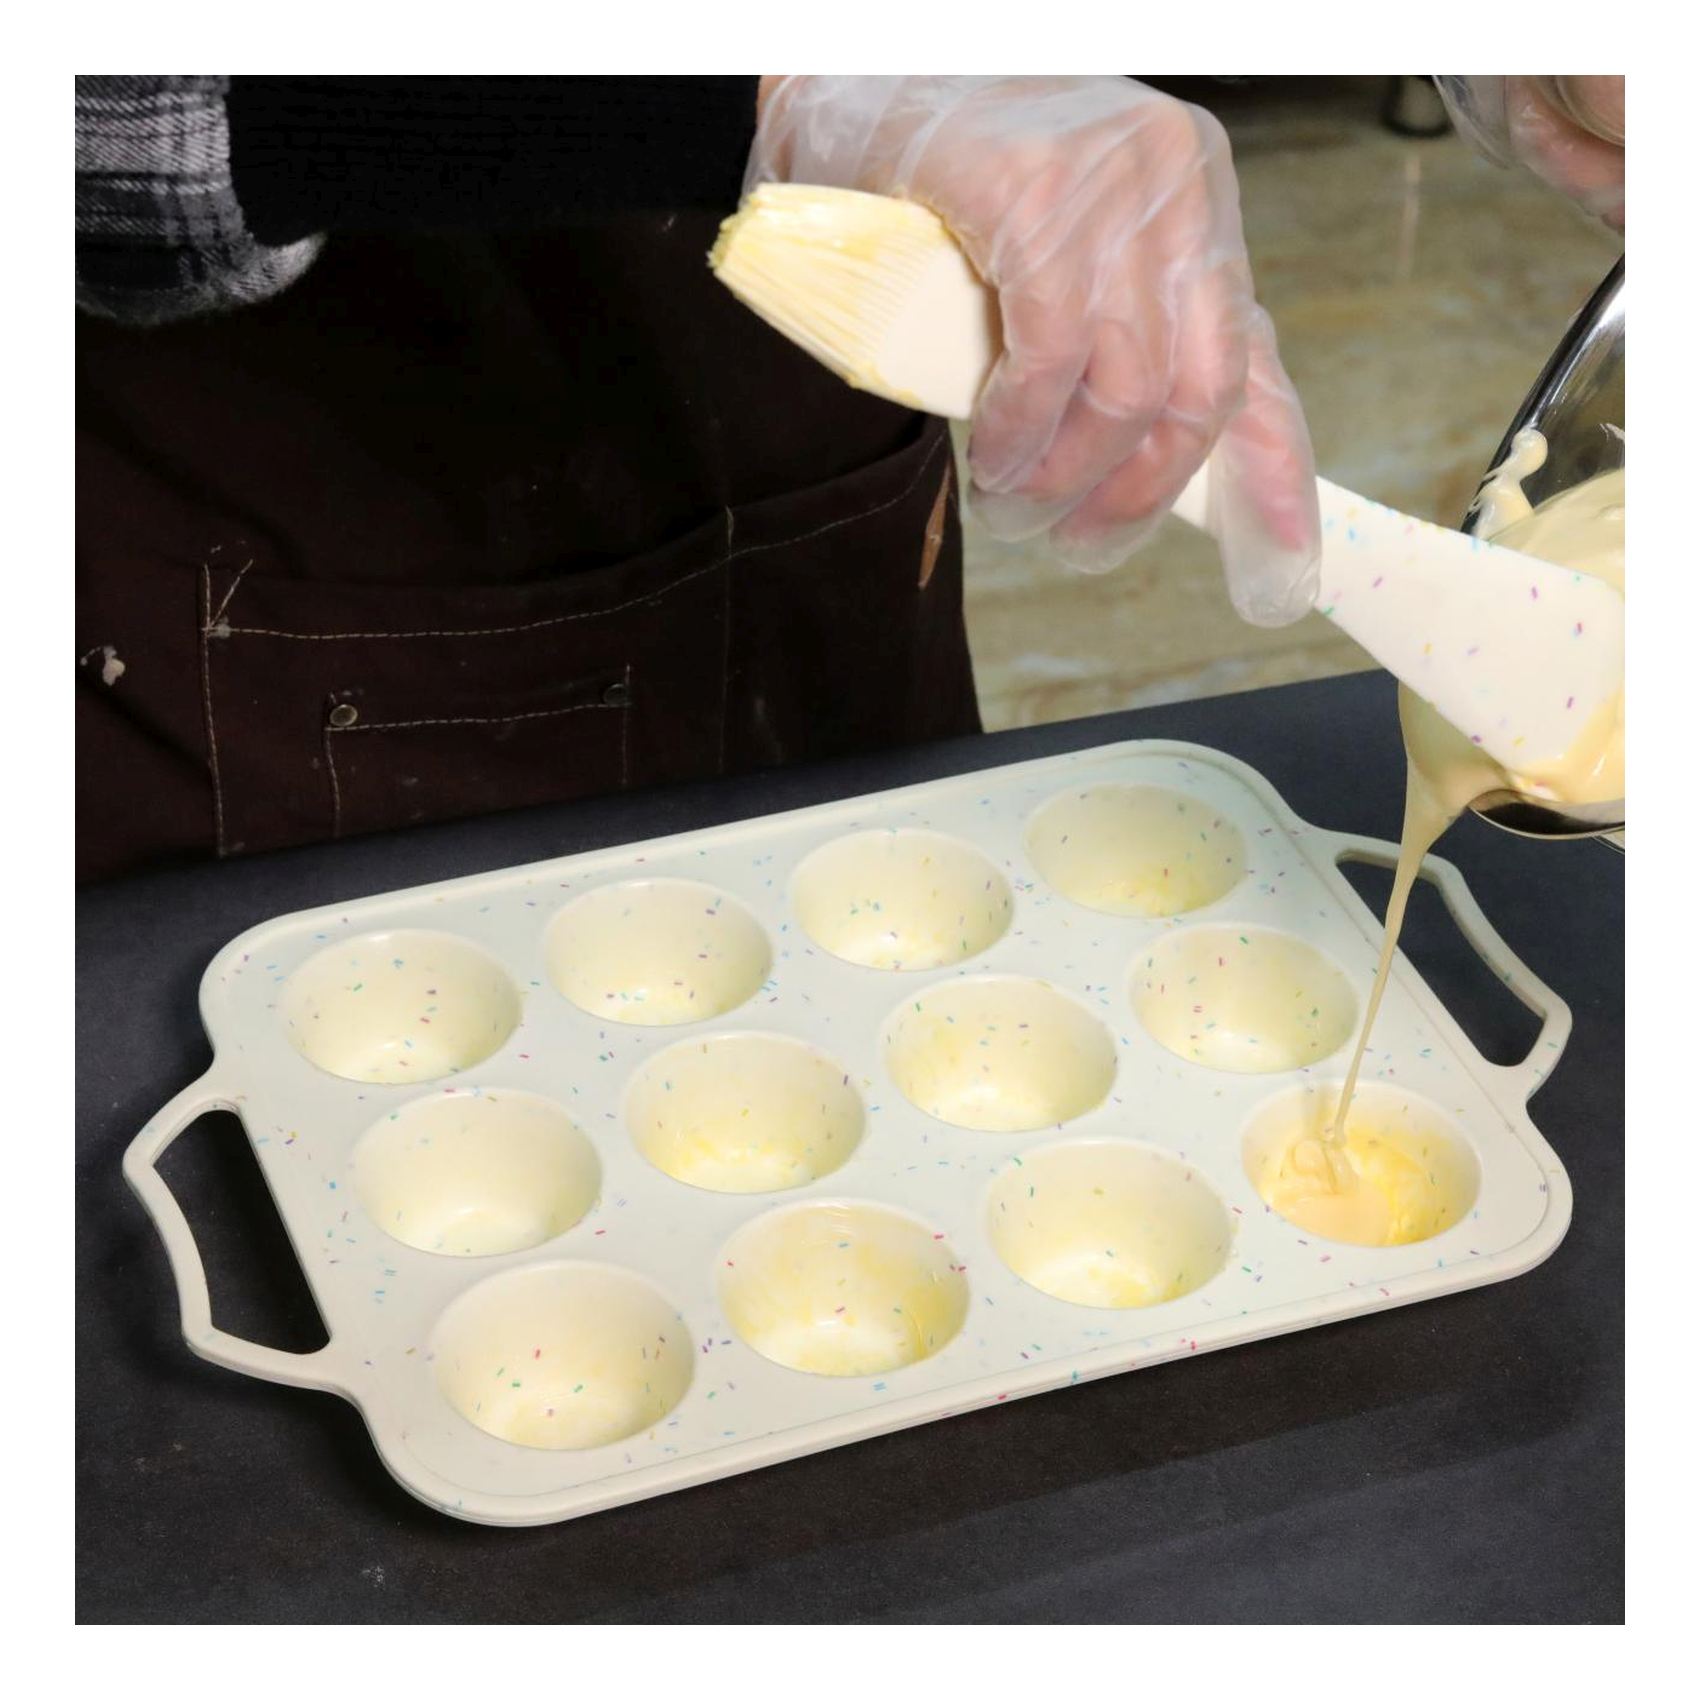 HomePro Elegant 12 Cups Silicone Muffin Pan